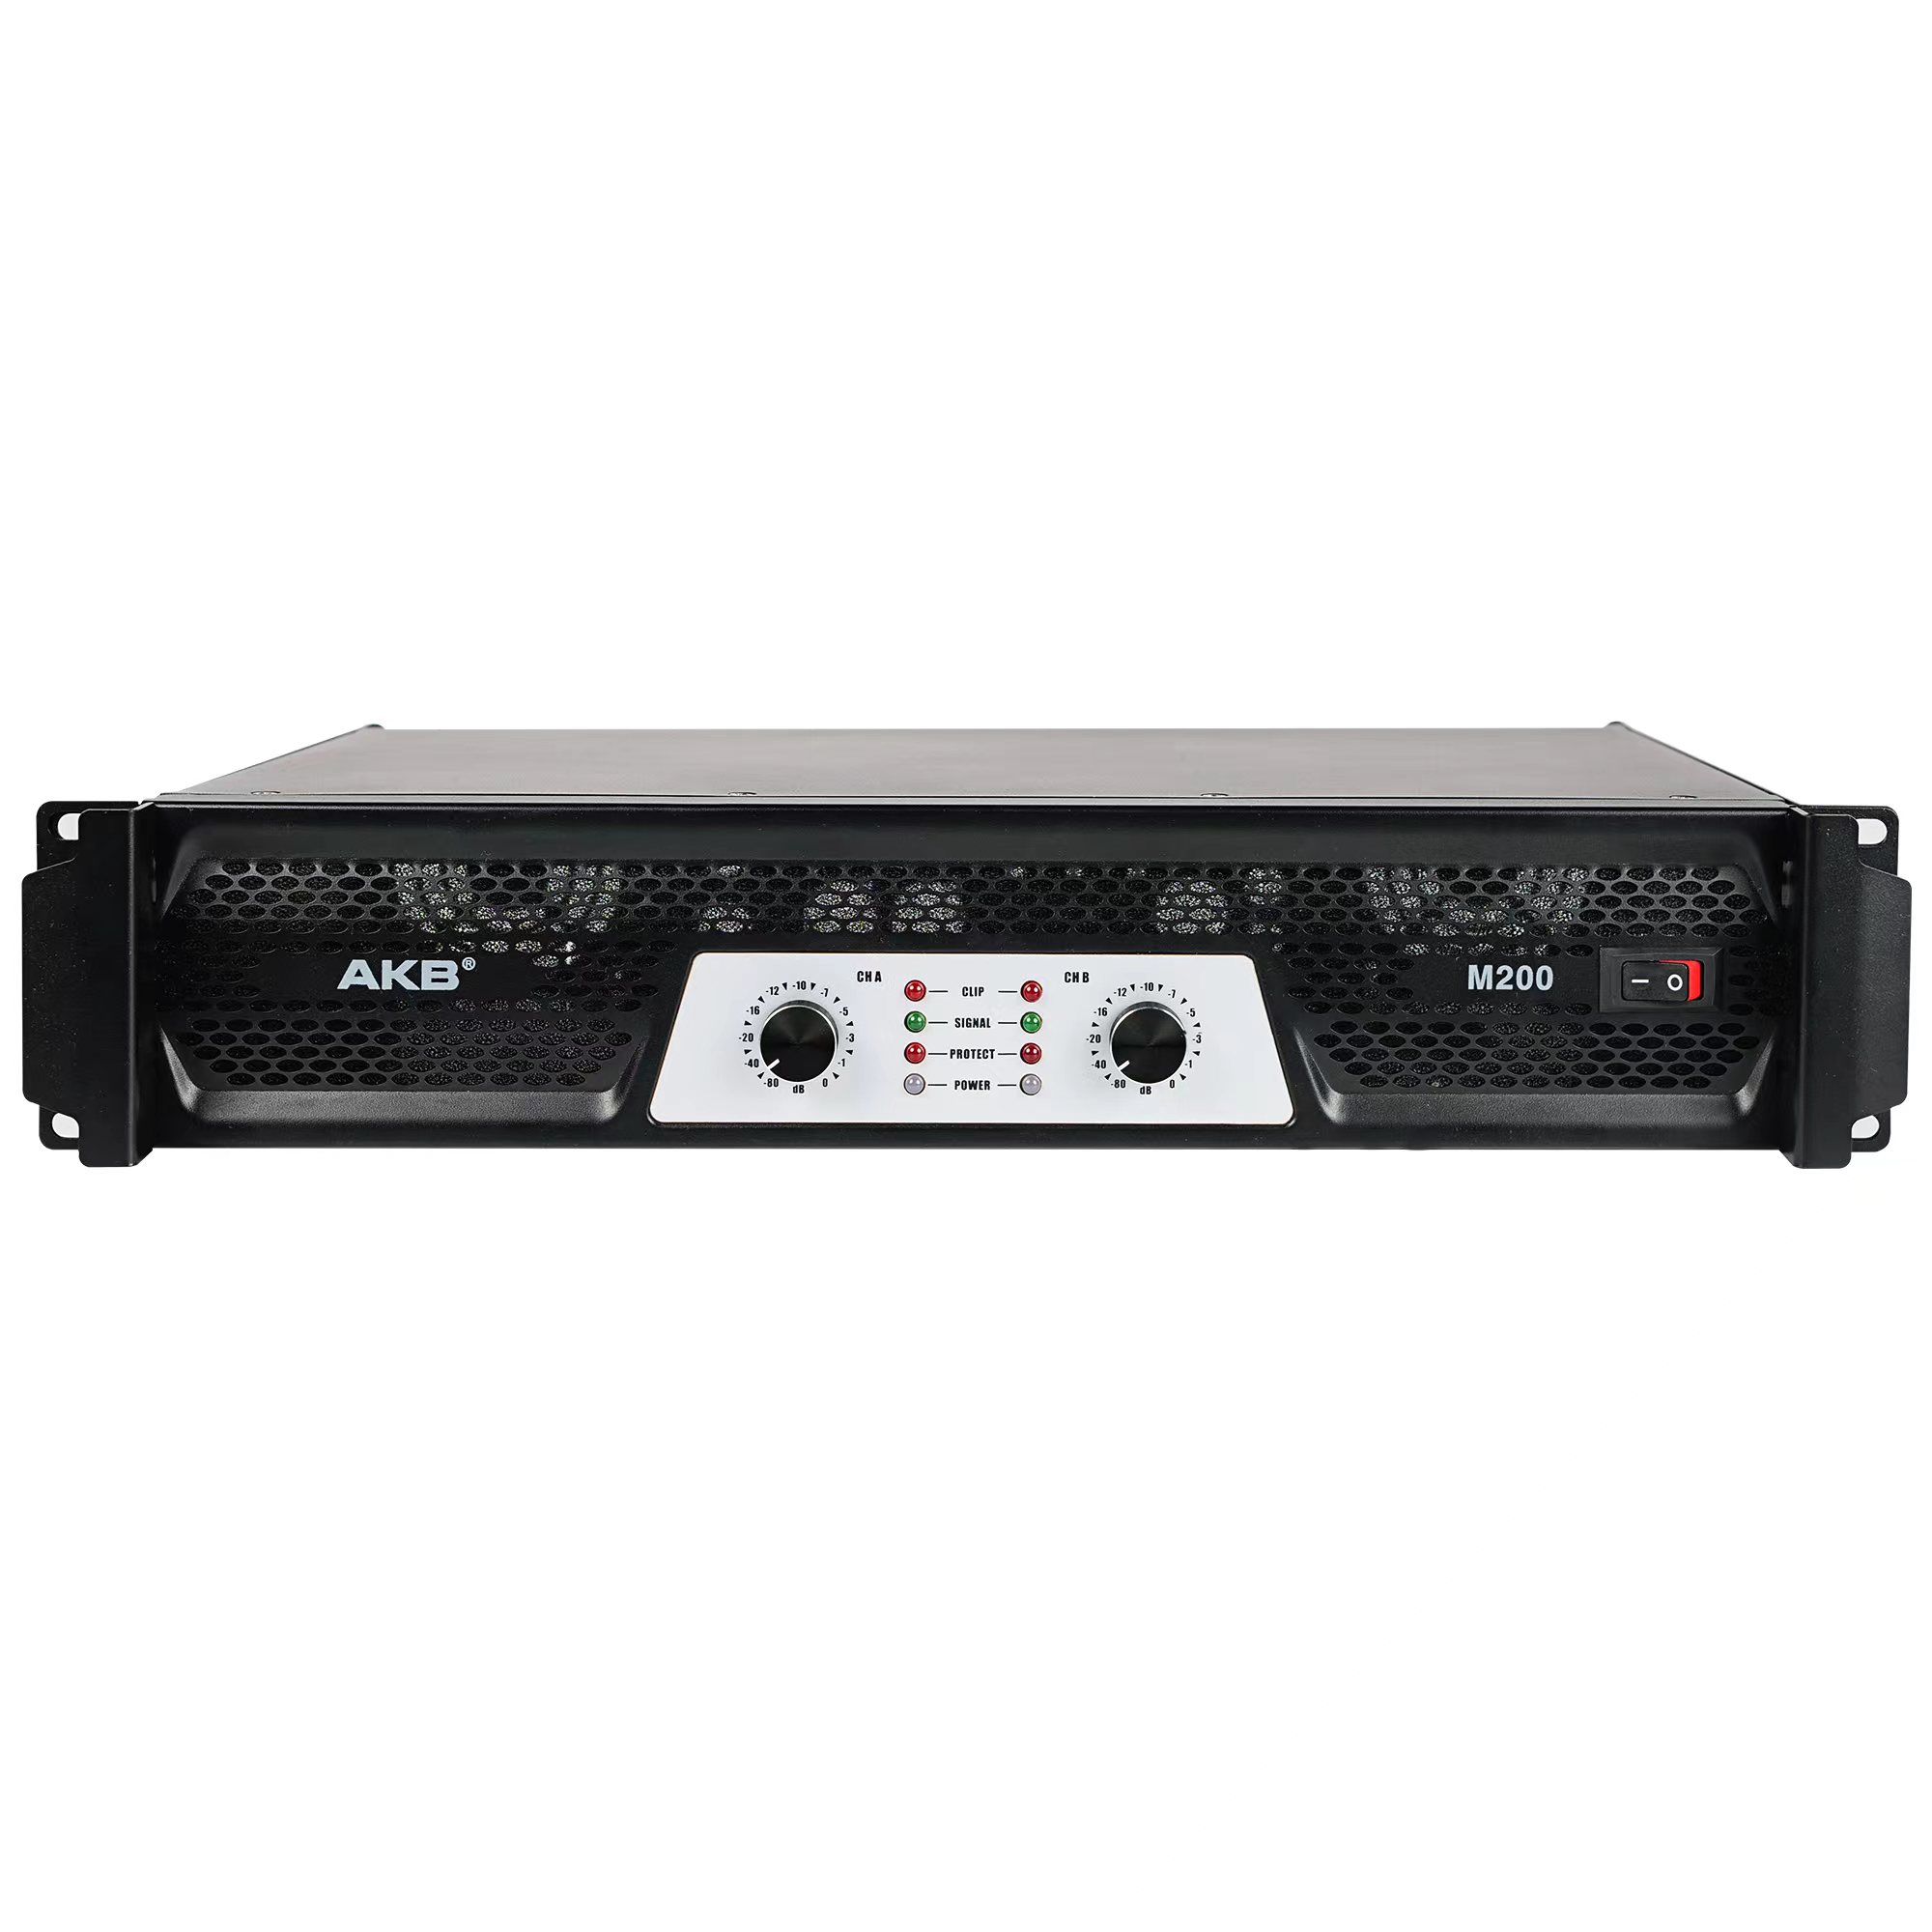 What Should You Look For When Buying a 400/200 Watt Amp?